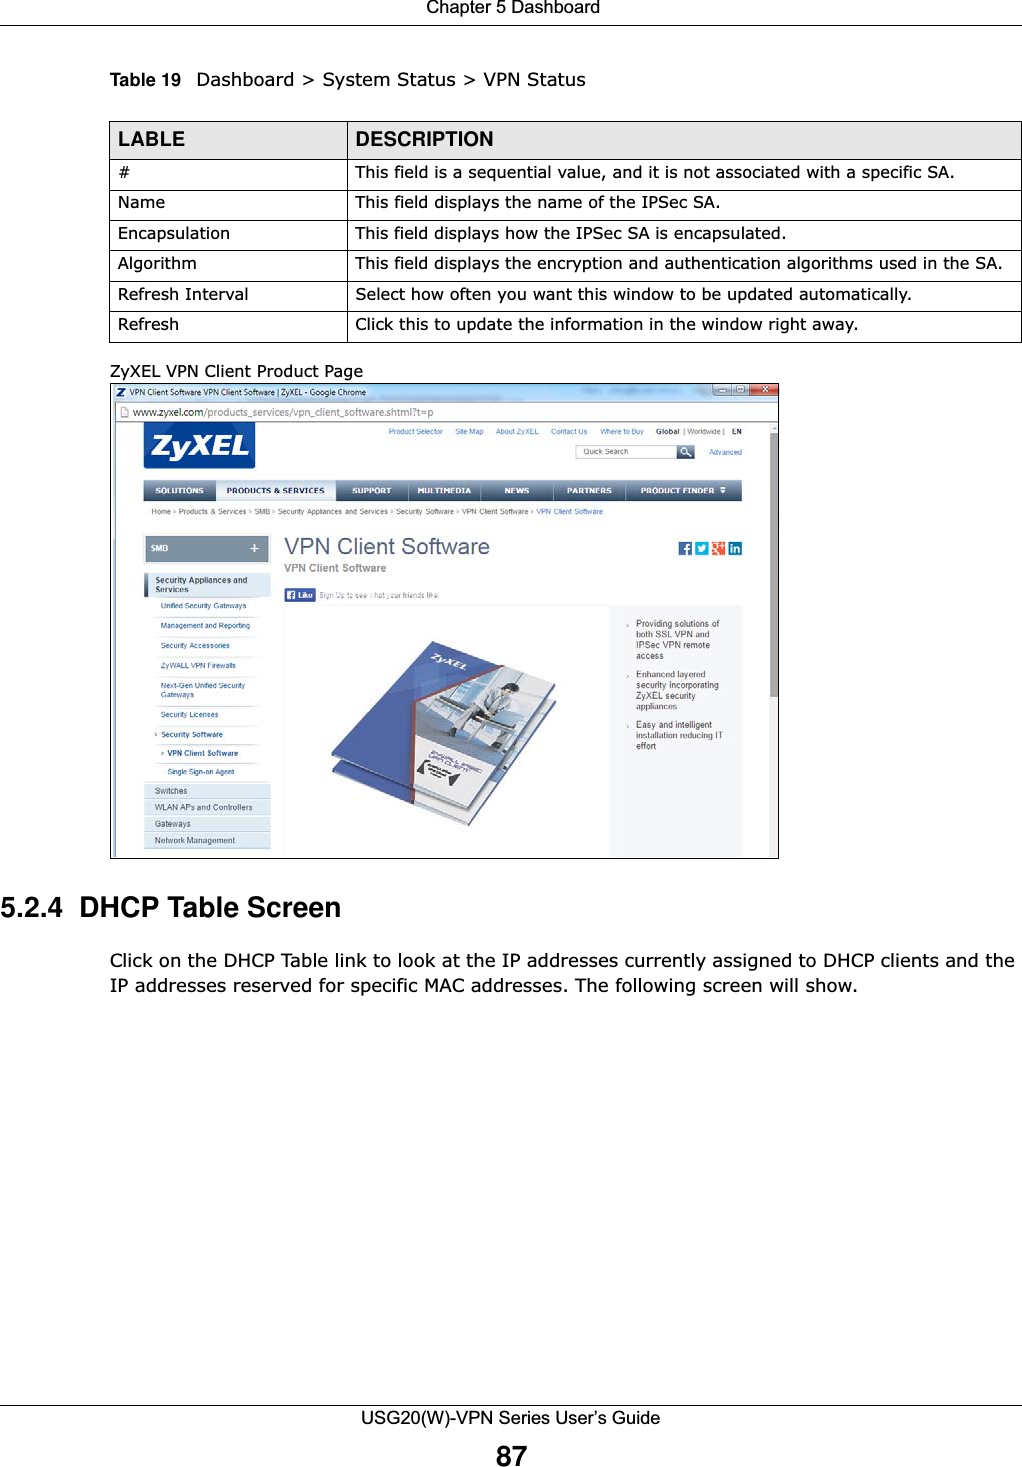  Chapter 5 DashboardUSG20(W)-VPN Series User’s Guide87Table 19   Dashboard &gt; System Status &gt; VPN StatusZyXEL VPN Client Product Page5.2.4  DHCP Table ScreenClick on the DHCP Table link to look at the IP addresses currently assigned to DHCP clients and the IP addresses reserved for specific MAC addresses. The following screen will show.LABLE DESCRIPTION# This field is a sequential value, and it is not associated with a specific SA.Name This field displays the name of the IPSec SA.Encapsulation This field displays how the IPSec SA is encapsulated.Algorithm This field displays the encryption and authentication algorithms used in the SA.Refresh Interval Select how often you want this window to be updated automatically.Refresh Click this to update the information in the window right away. 